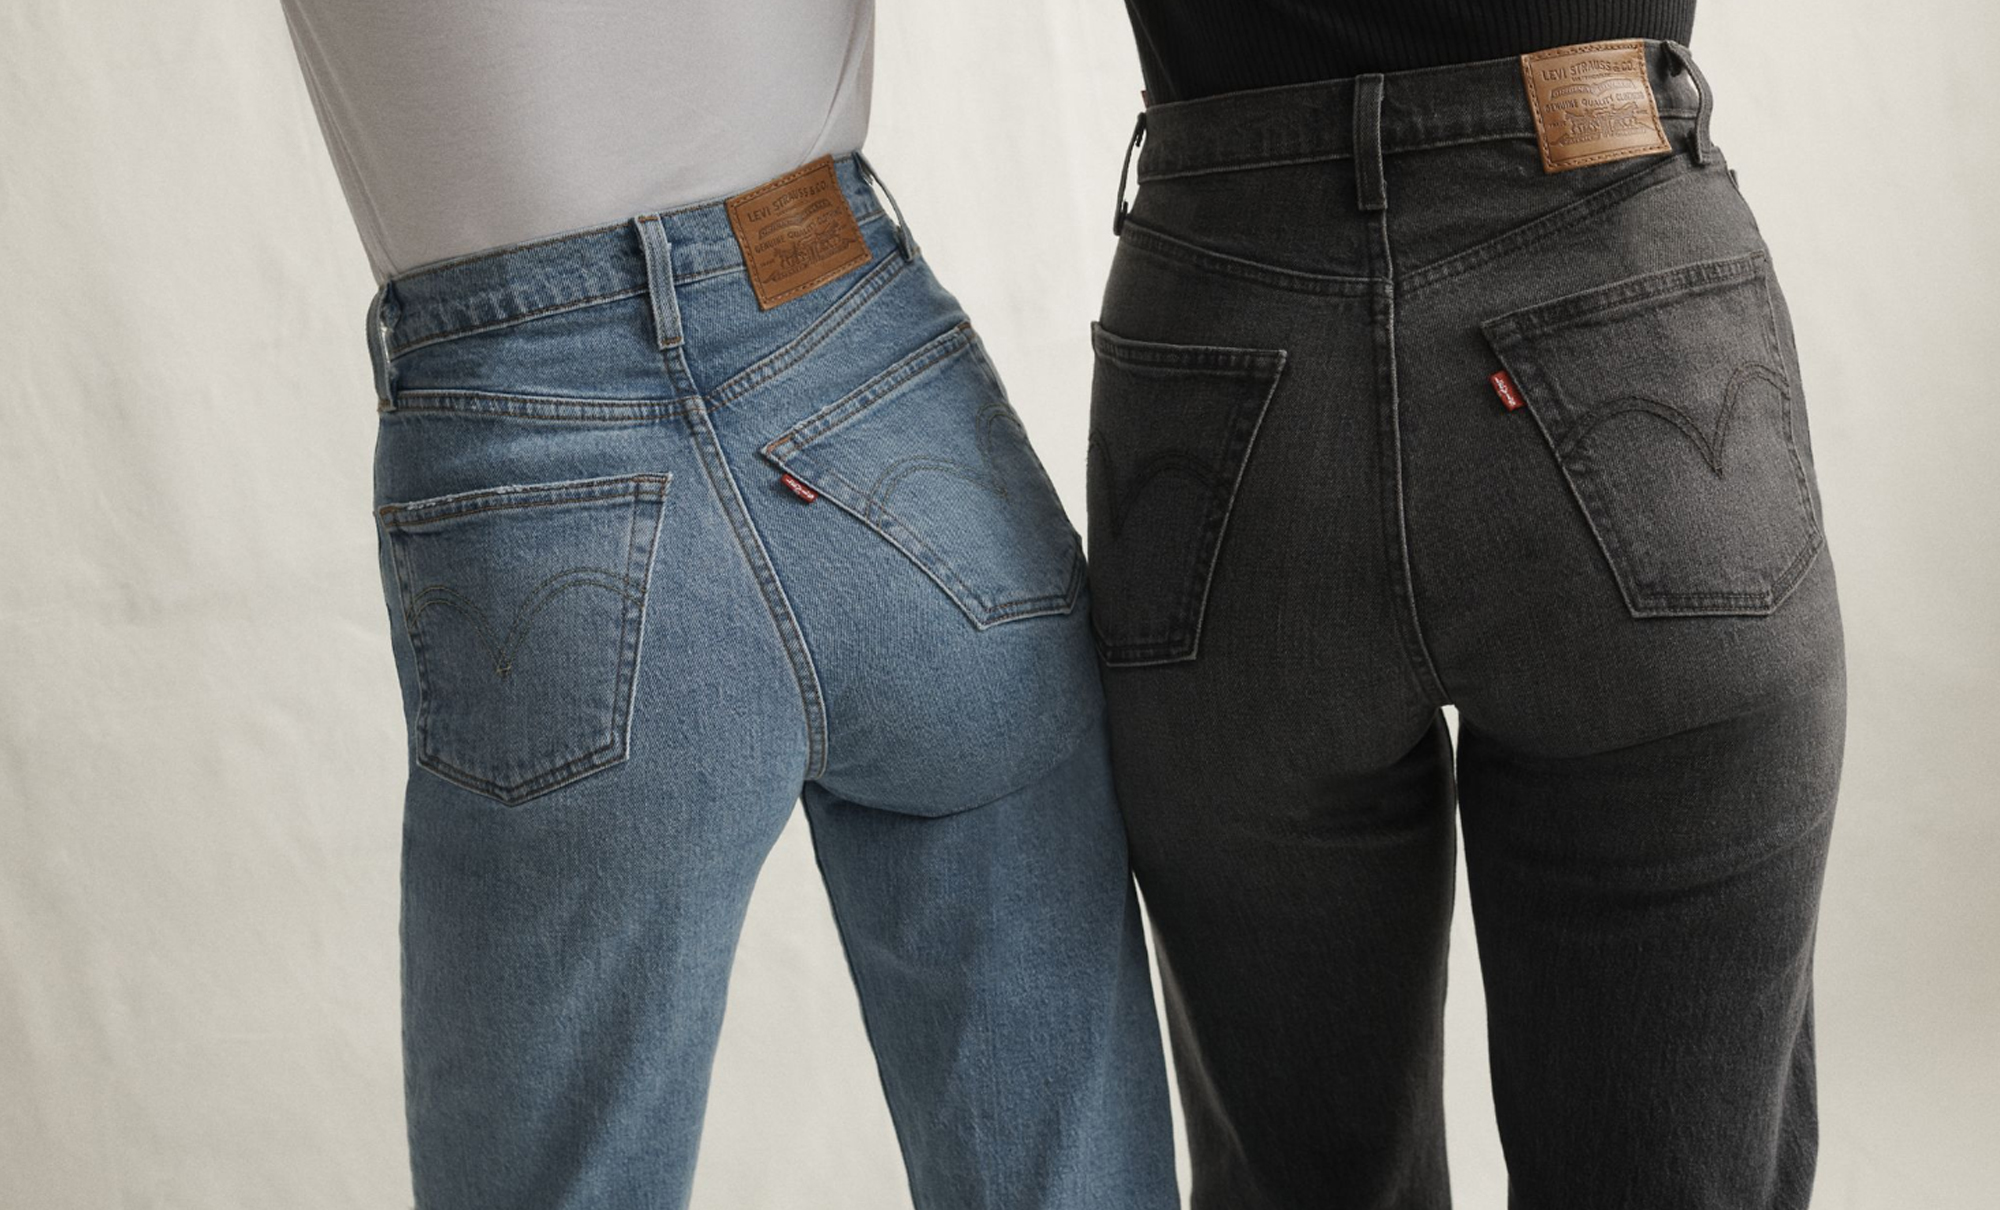 Nothing but Love for the 'Mom Jean' - Levi Strauss & Co : Levi Strauss & Co